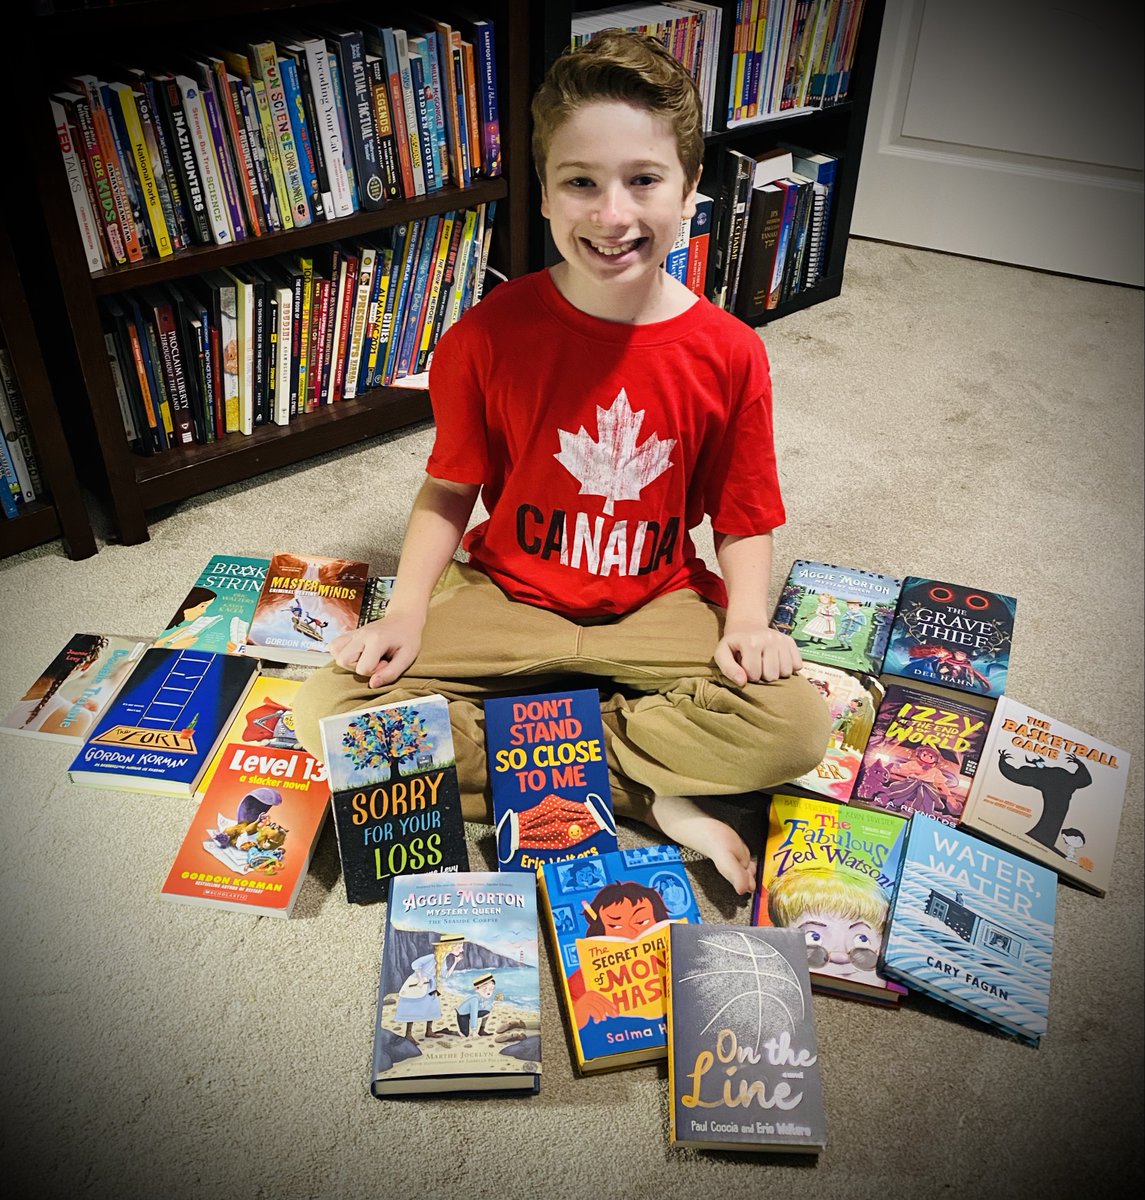 Happy #IReadCanadianDay! Many of my all-time favorite #authors & #books are #Canadian! Why do #IReadCanadian? Well, the #stories are awesome & meaningful, they shine a light on important #MG issues & because the #writers are so incredibly kind! What are you #reading today? I ❤️🇨🇦